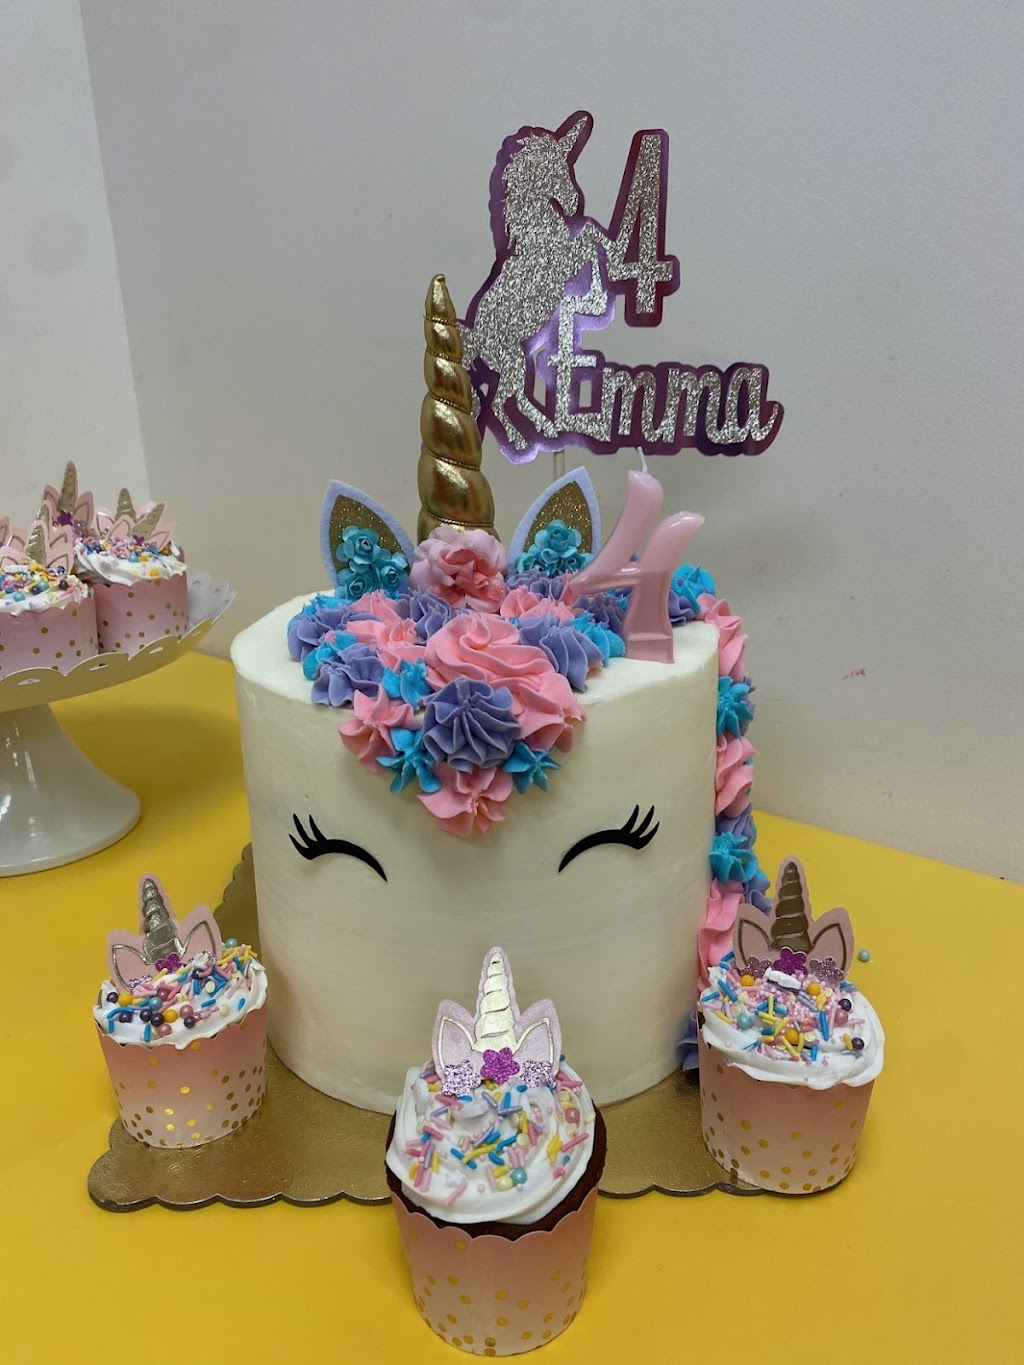 Angys Homemade Cakes and More | 45 Bracken Ct, Howell Township, NJ 07731 | Phone: (347) 307-7351